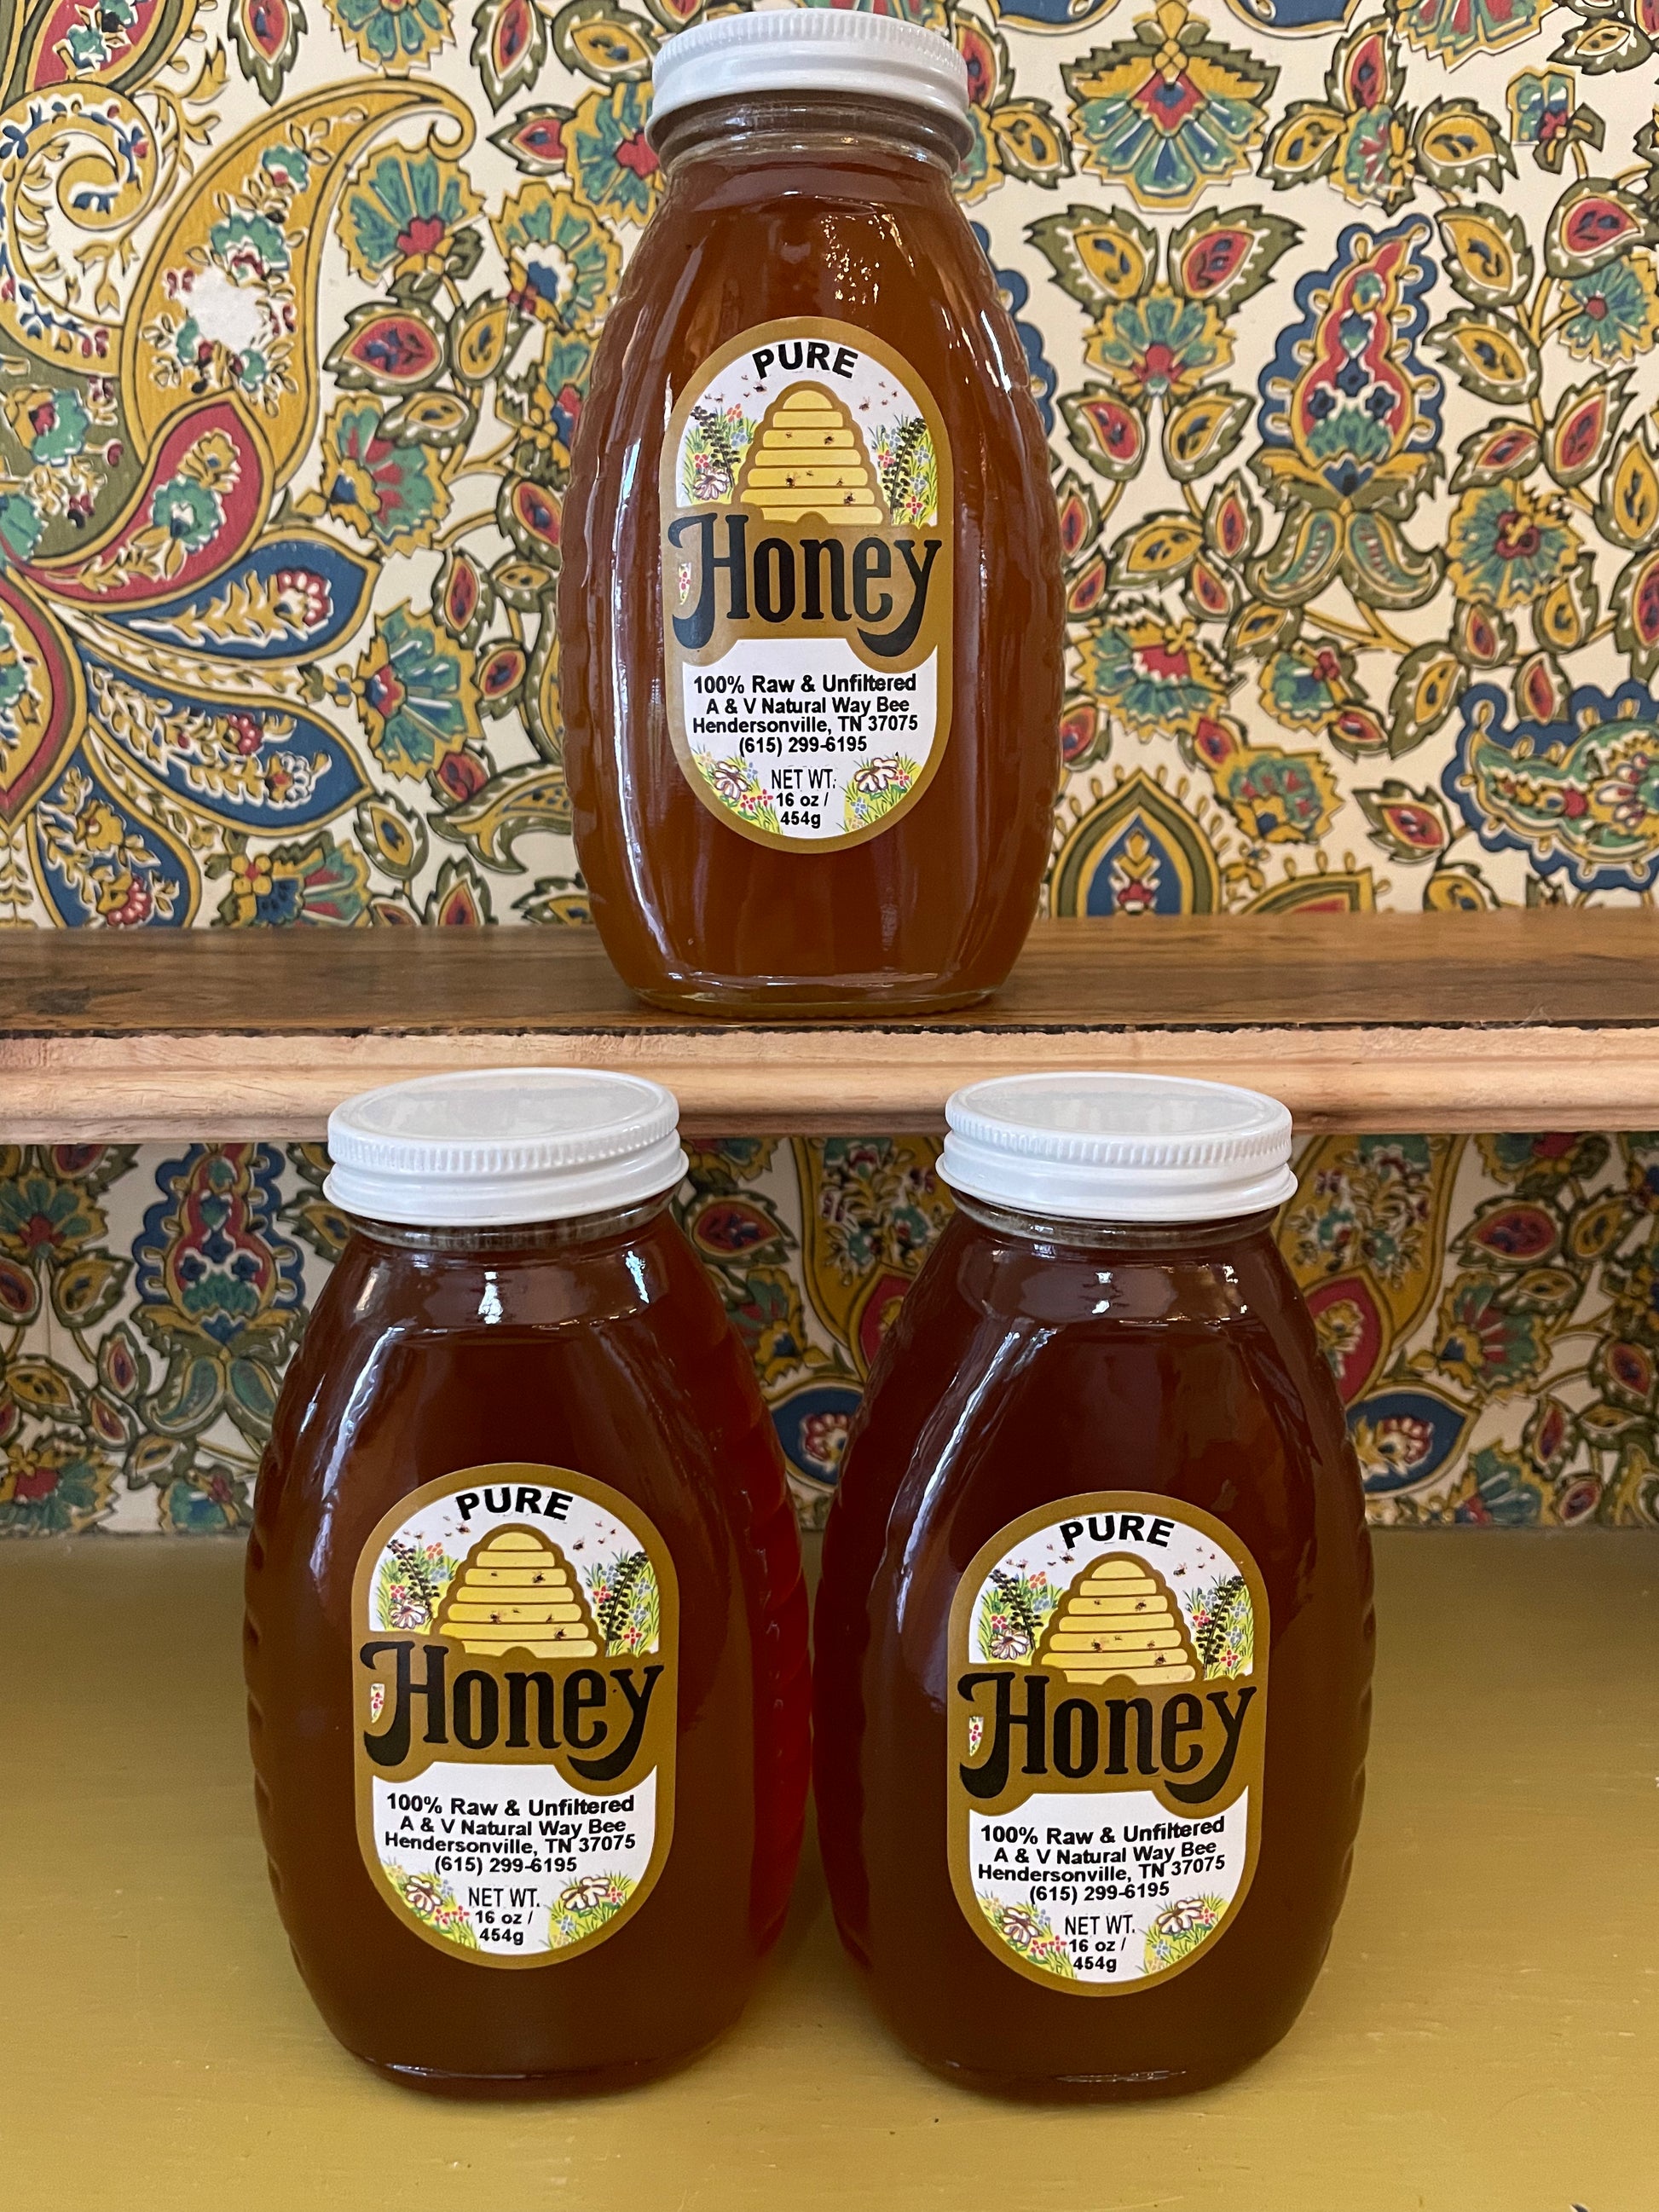 Local Honey-Foodie > Food, Beverages & Tobacco > Food Items > Condiments & Sauces > Honey-Quinn's Mercantile